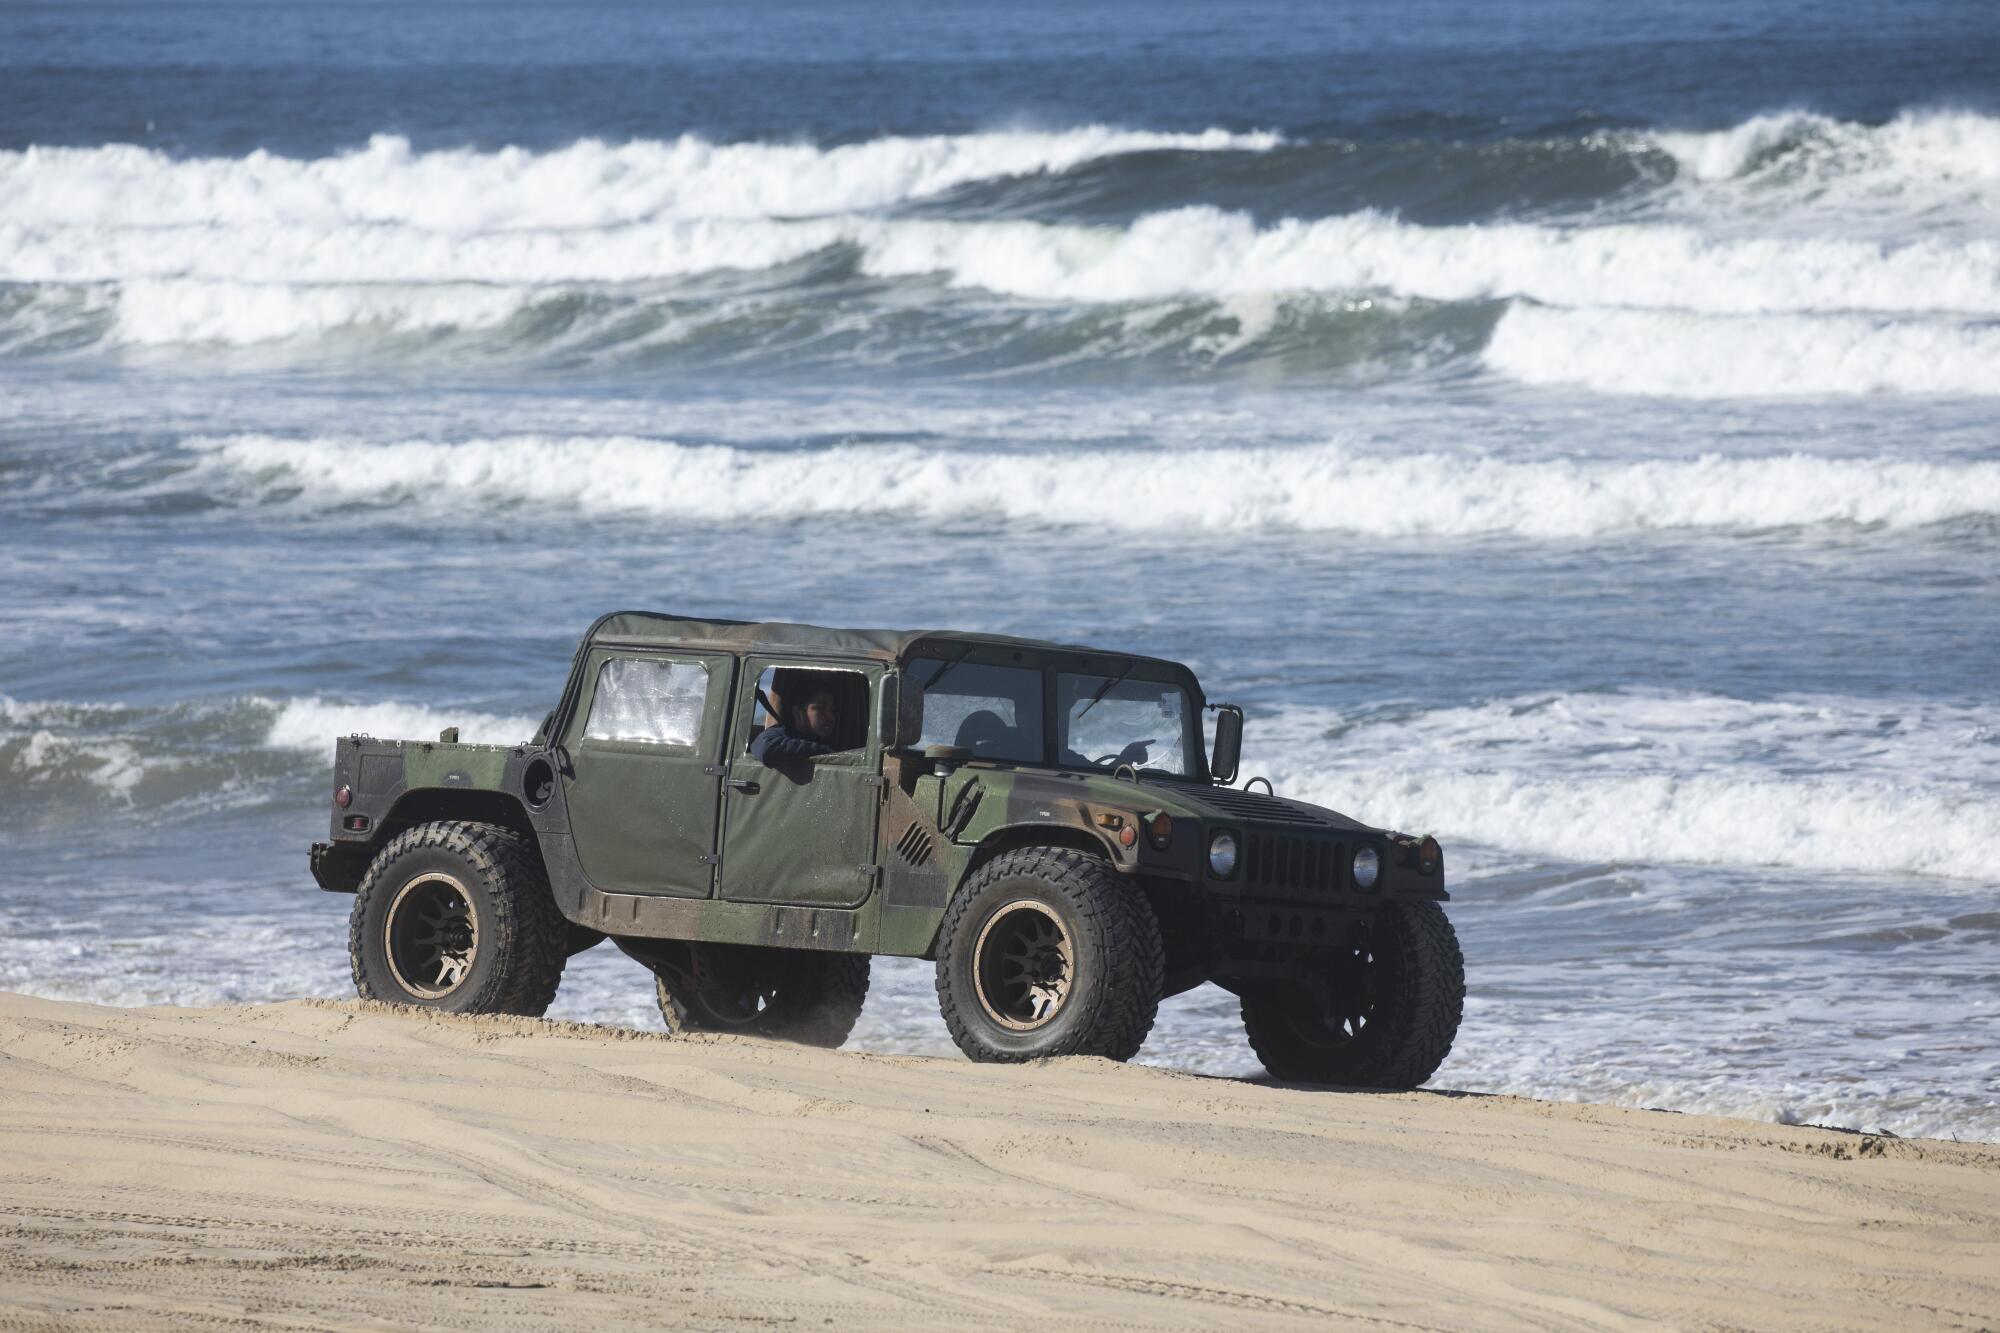 A military-style Humvee drives on on the beach near the water